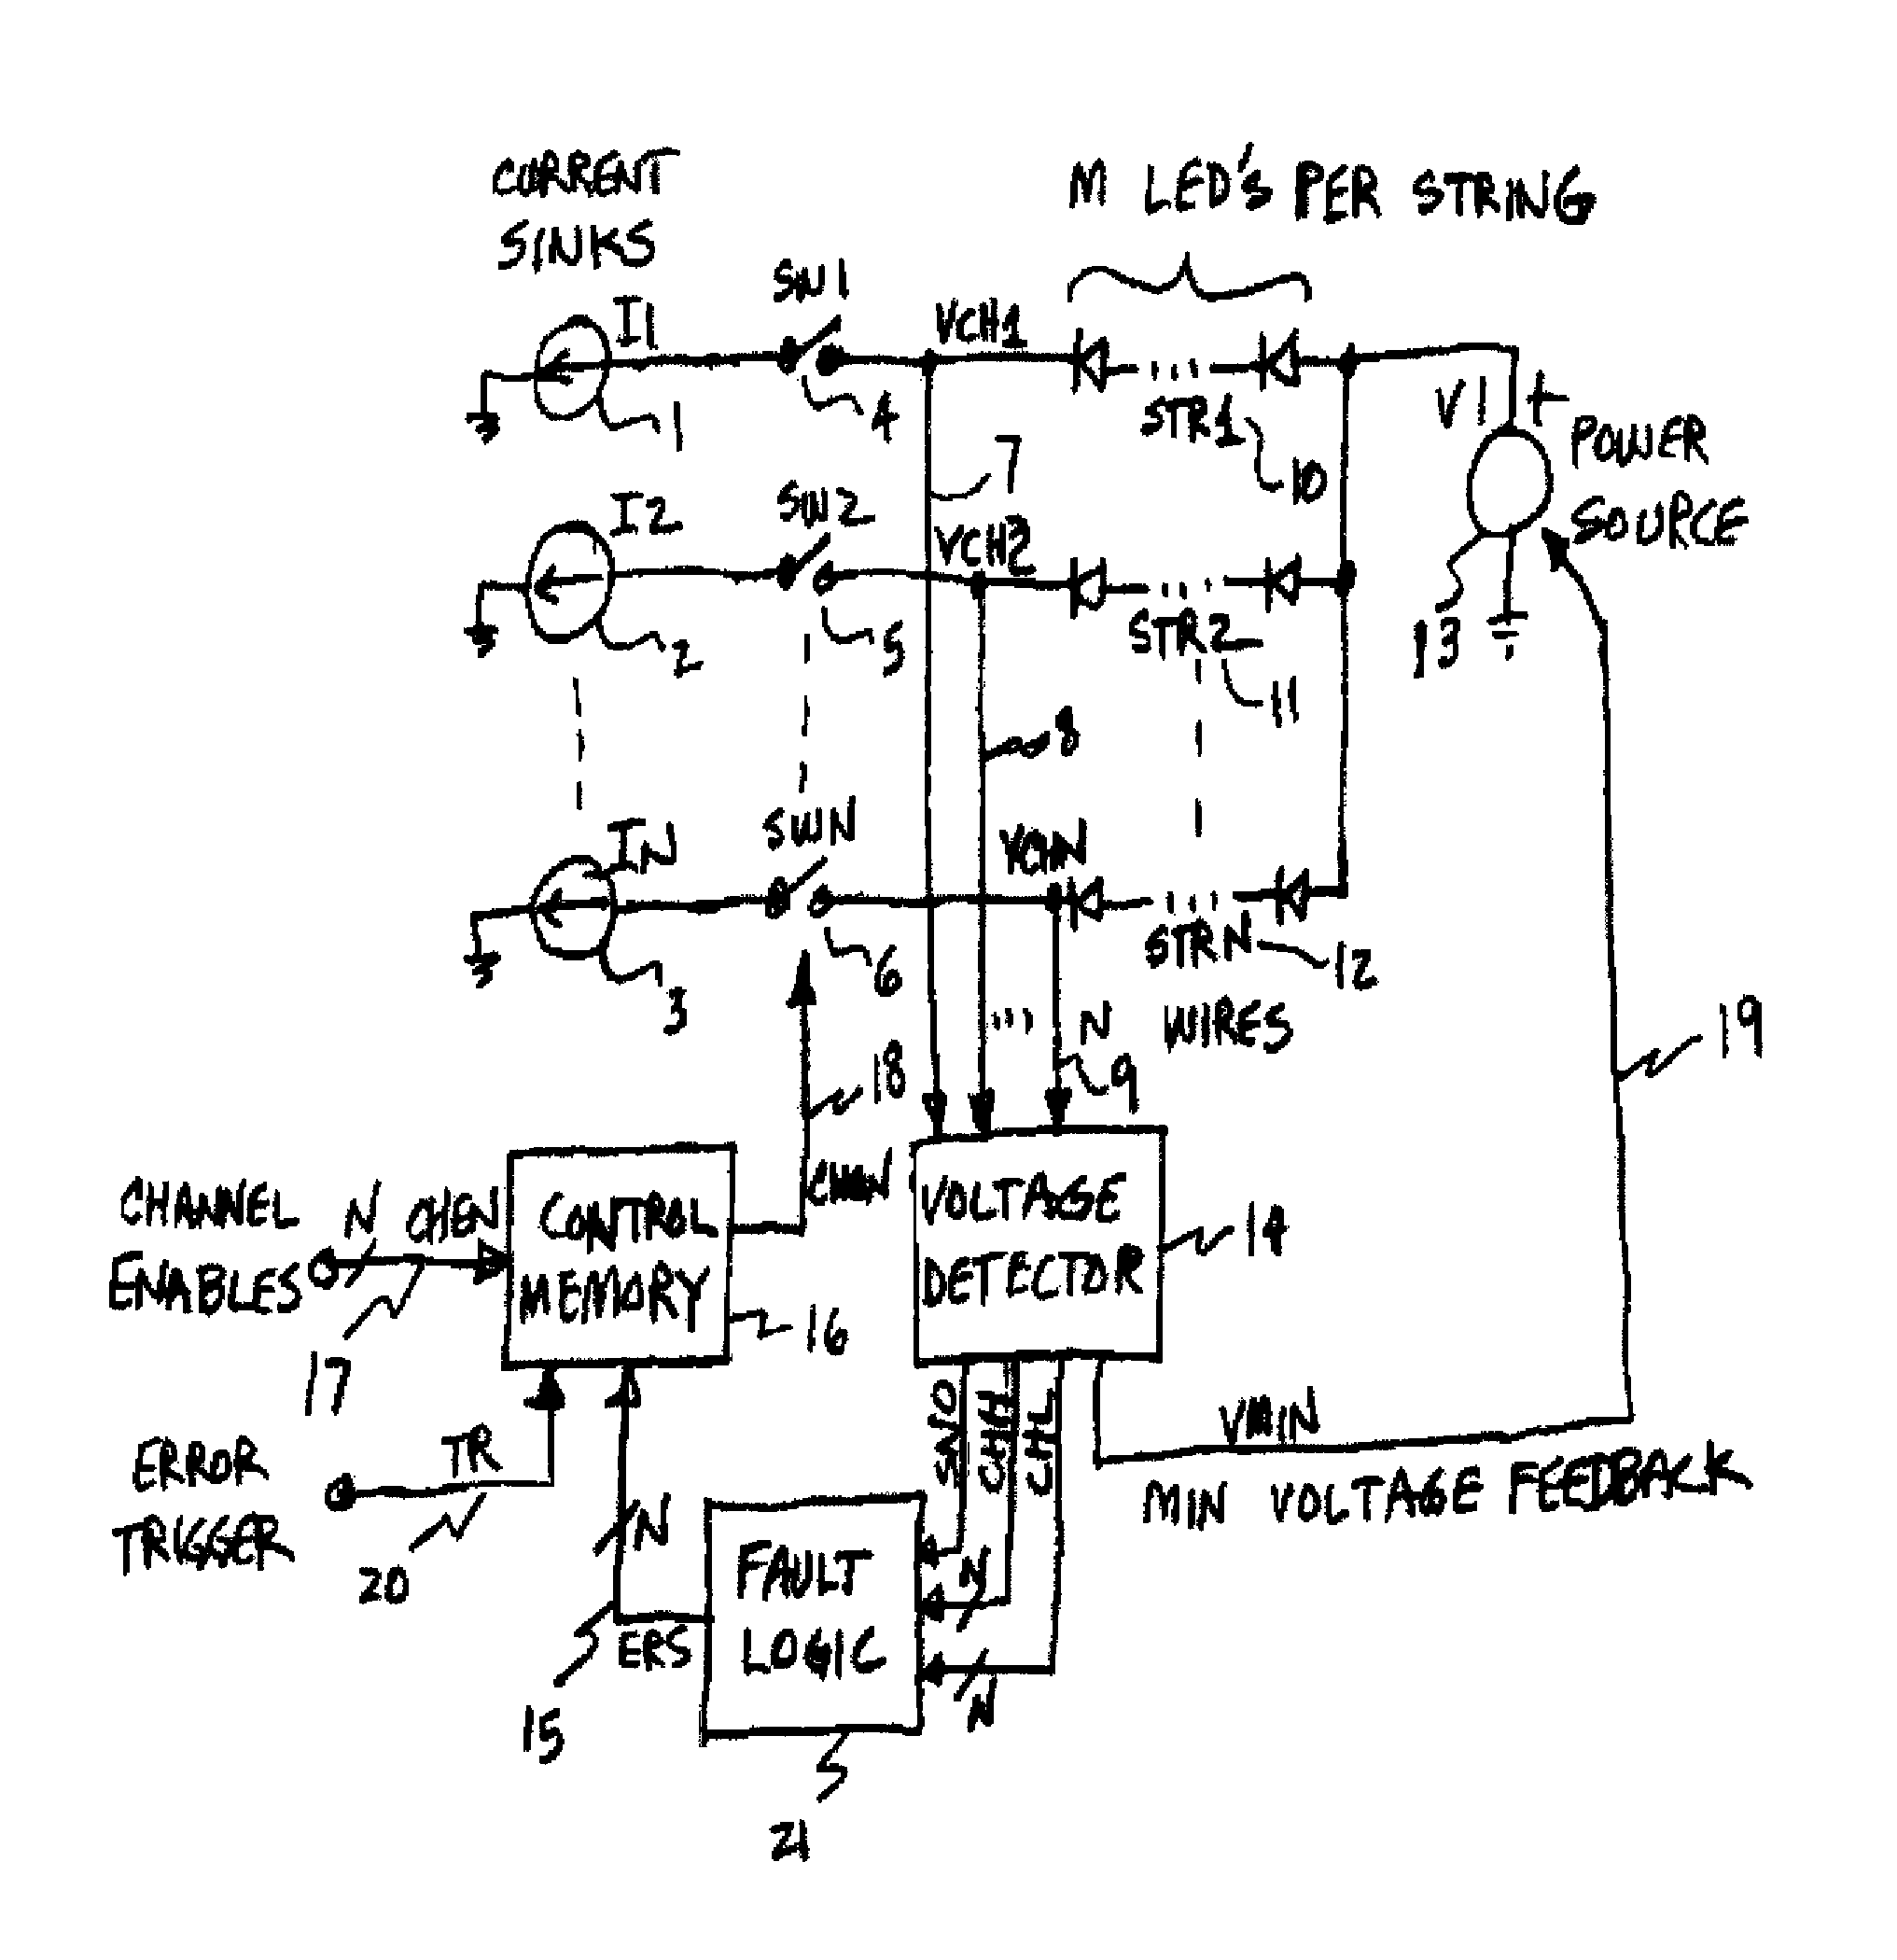 Circuit for detection and control of LED string operation